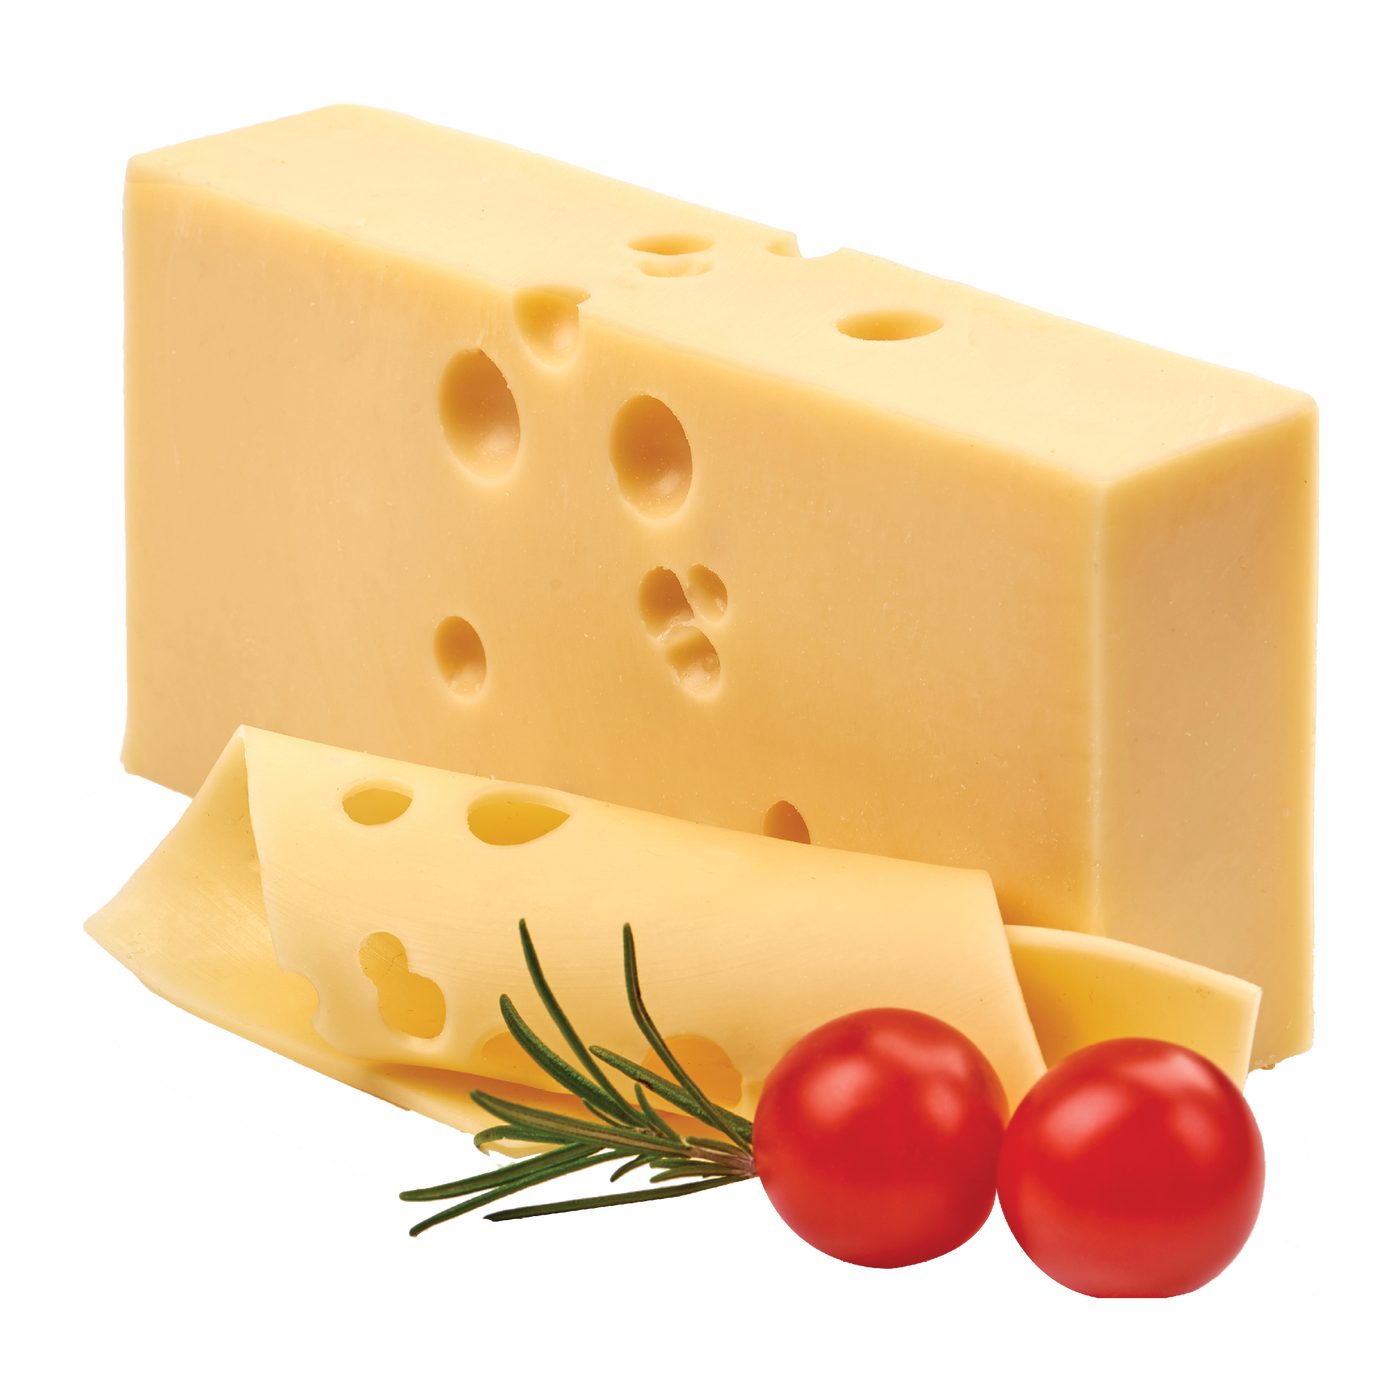 Imported Emmental Cheese